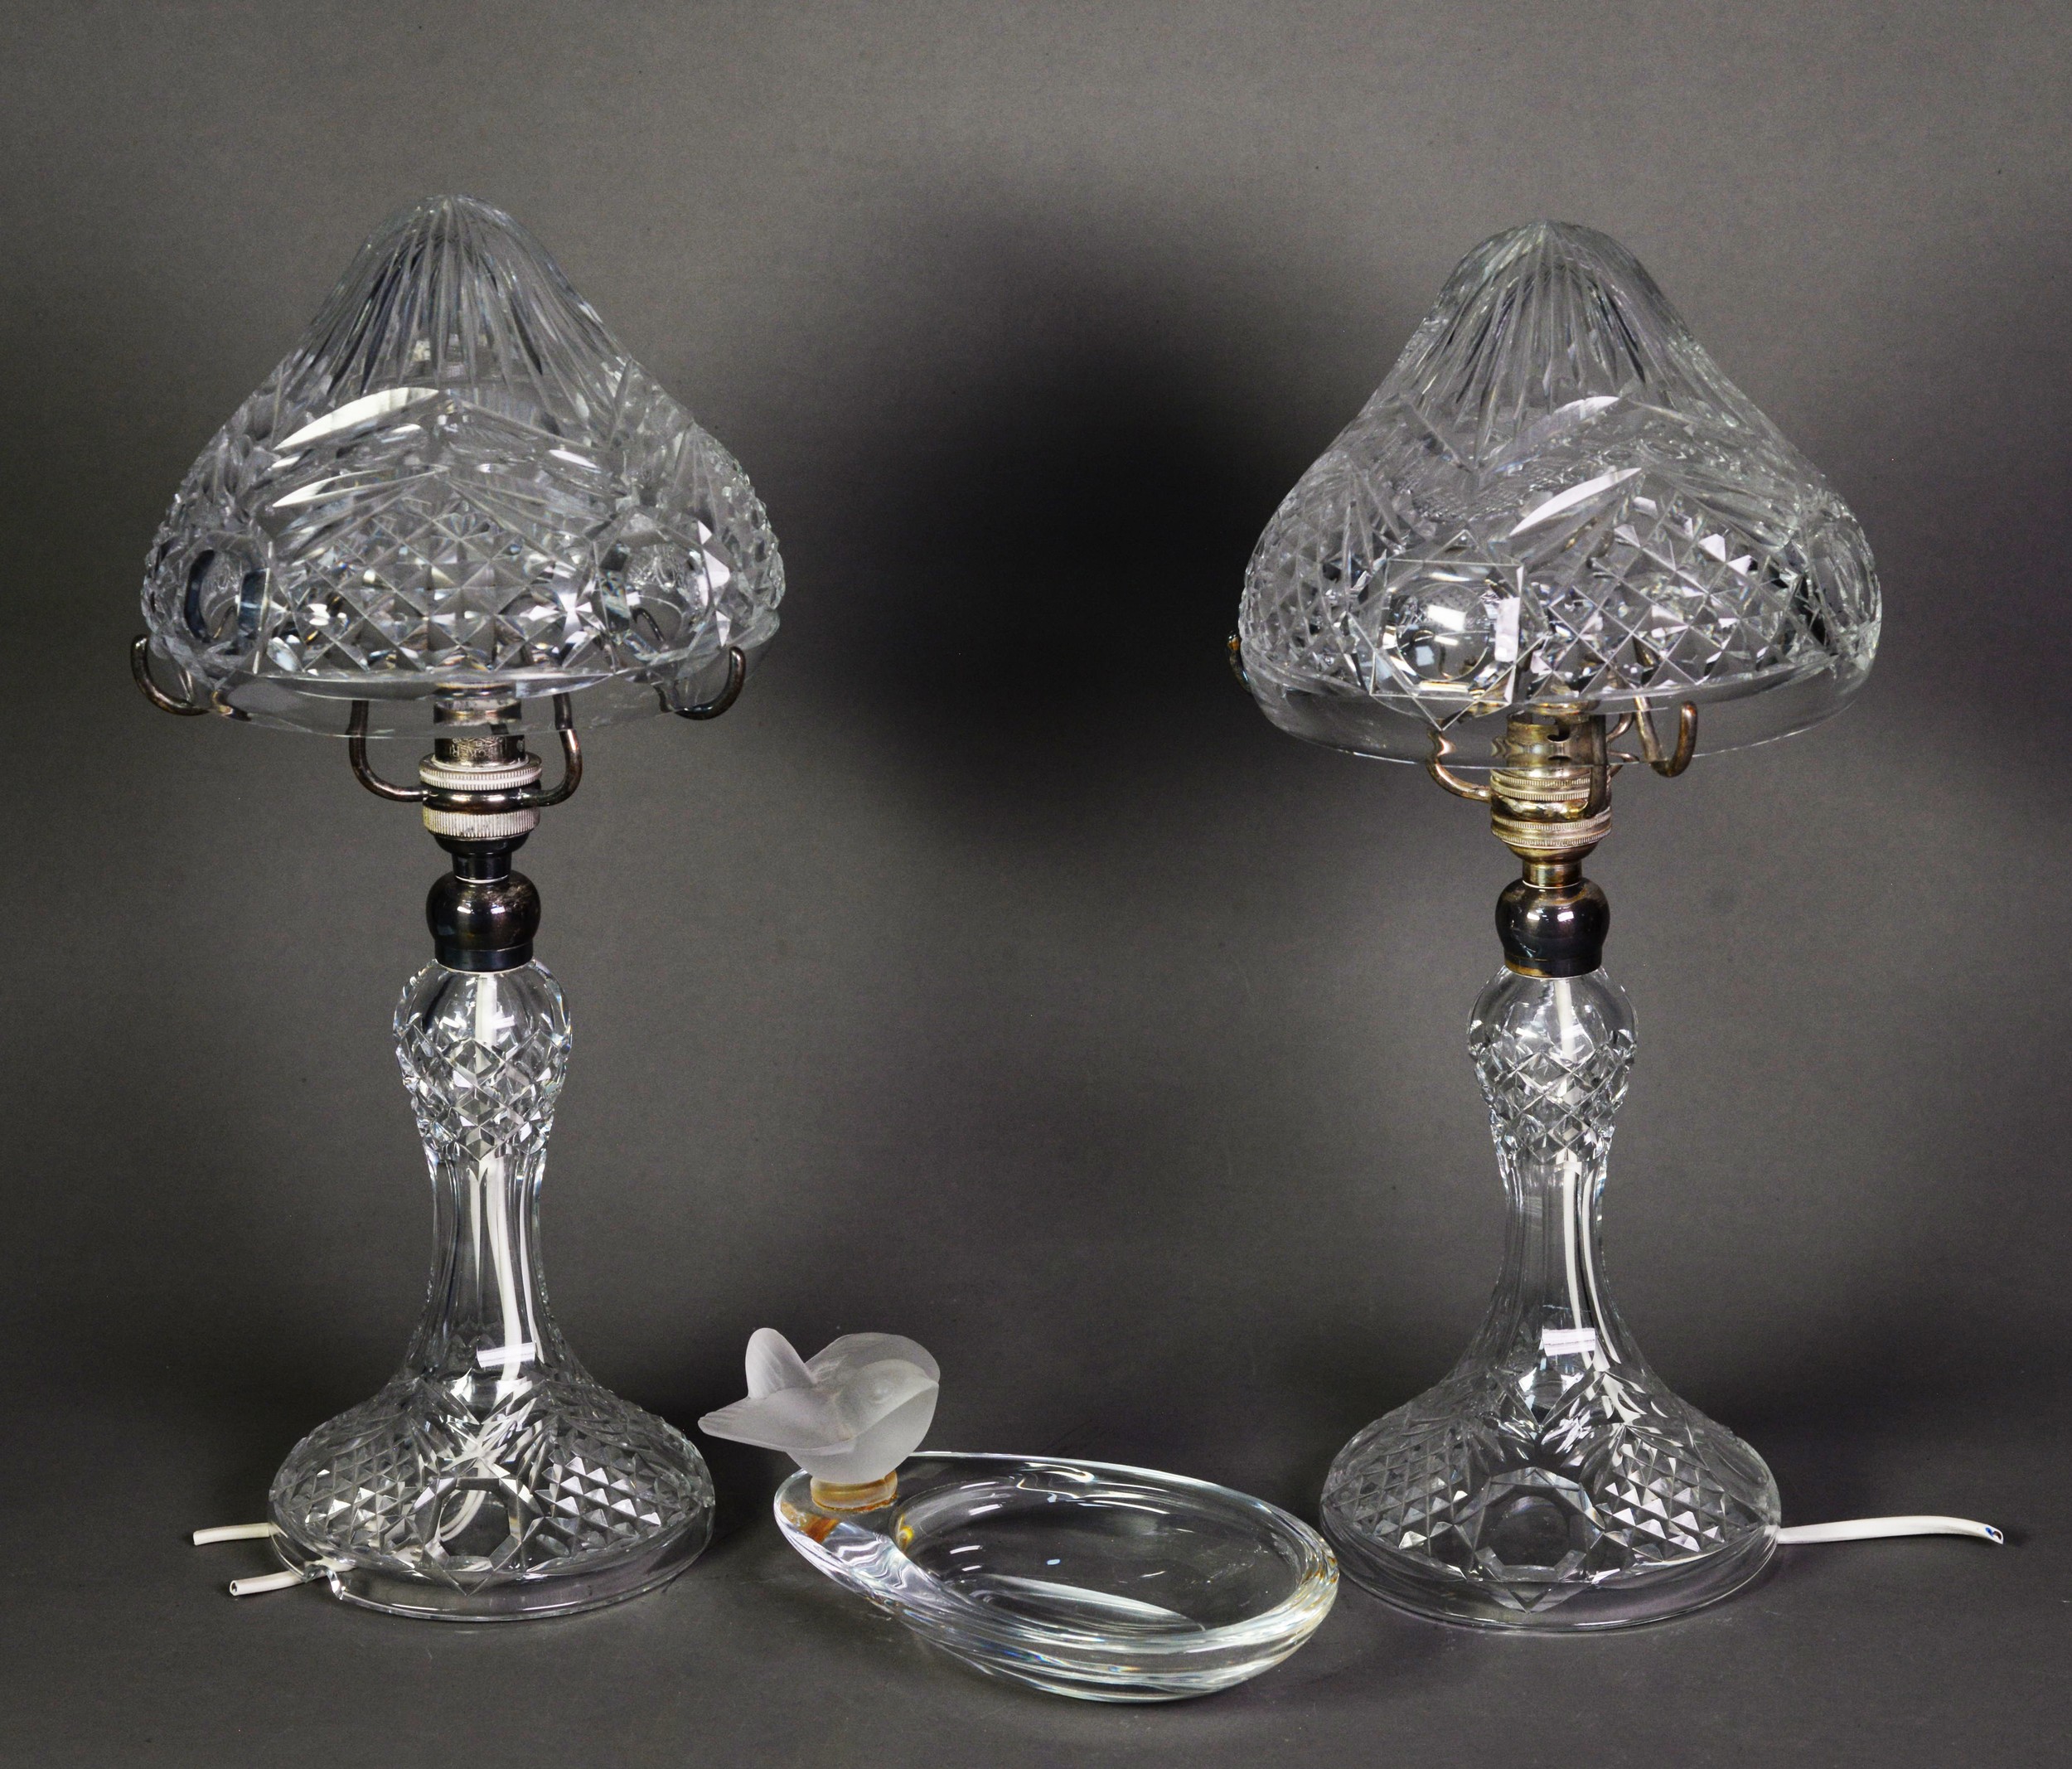 PAIR OF CUT GLASS TABLE LAMPS, each with baluster column, spreading foot, pointed shade and